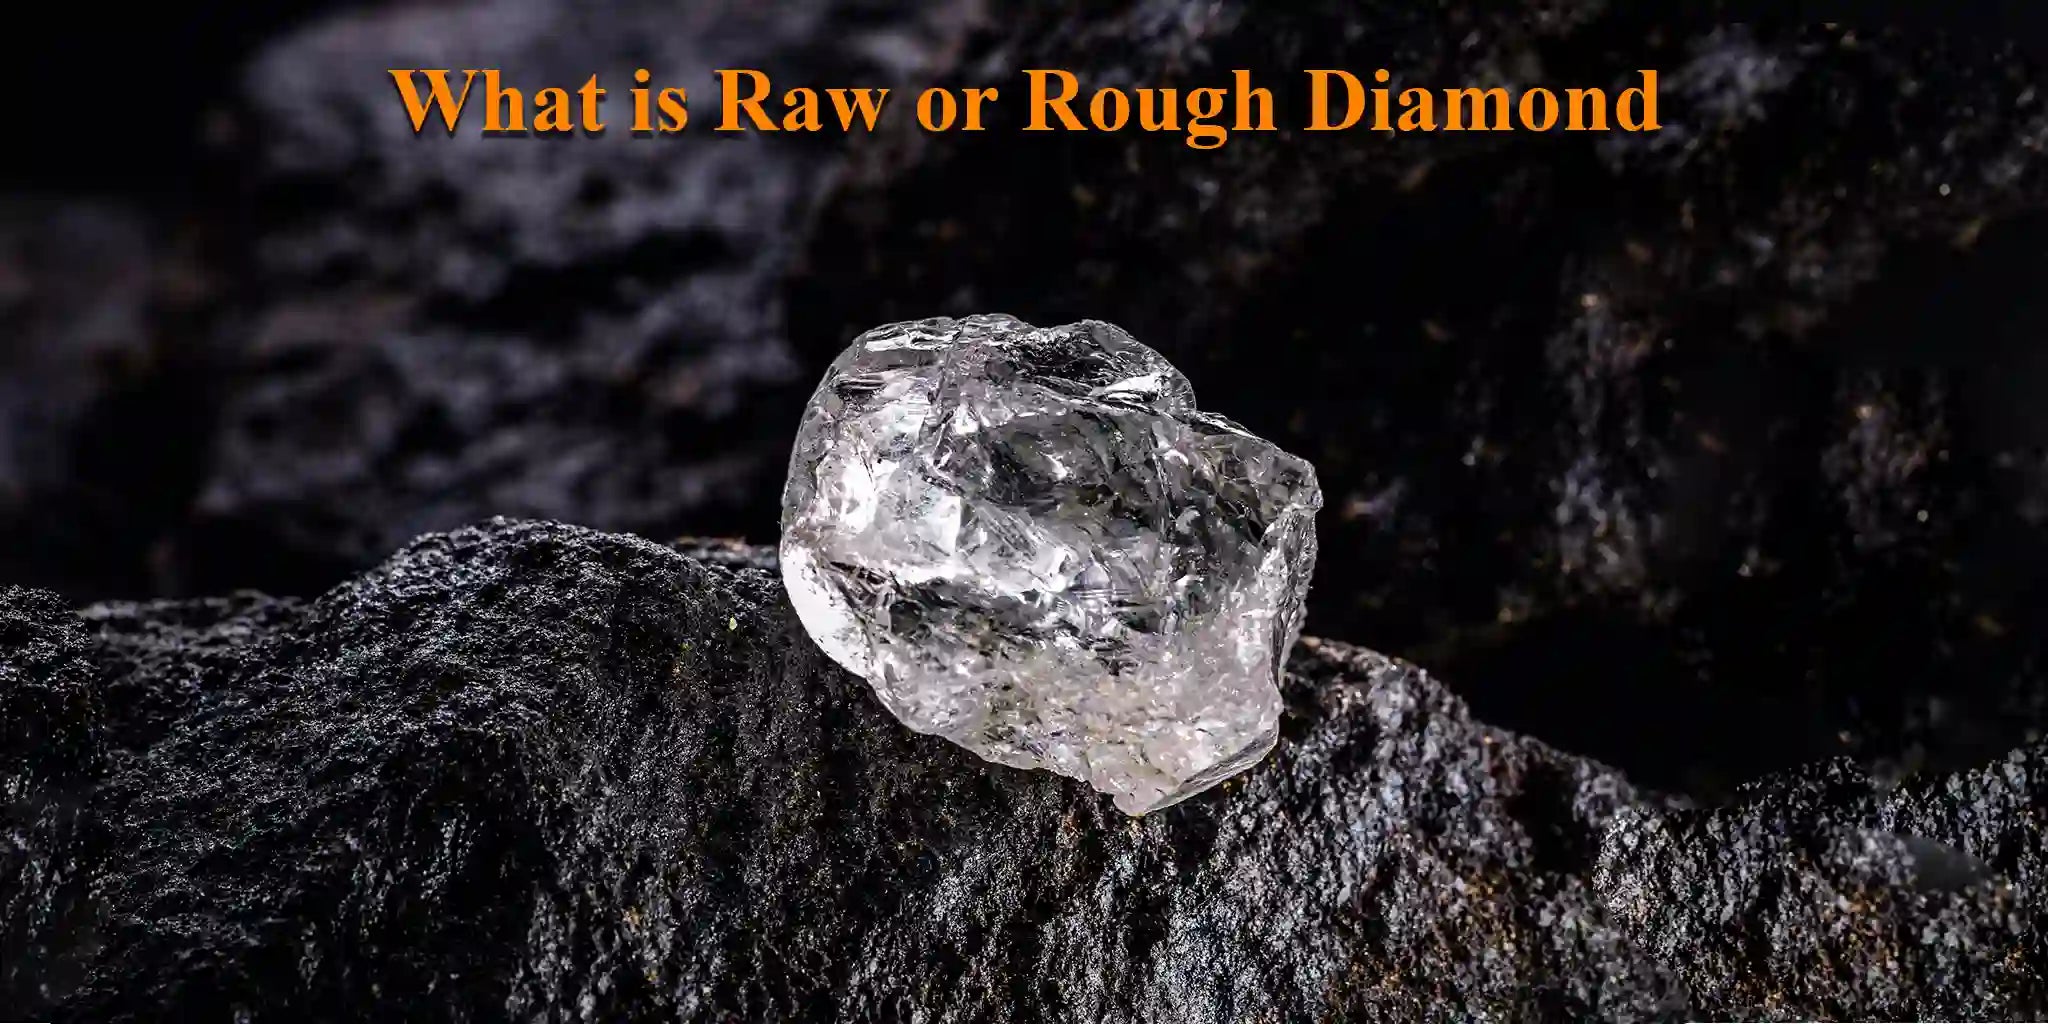 Raw uncut diamond mined from the earth's crust